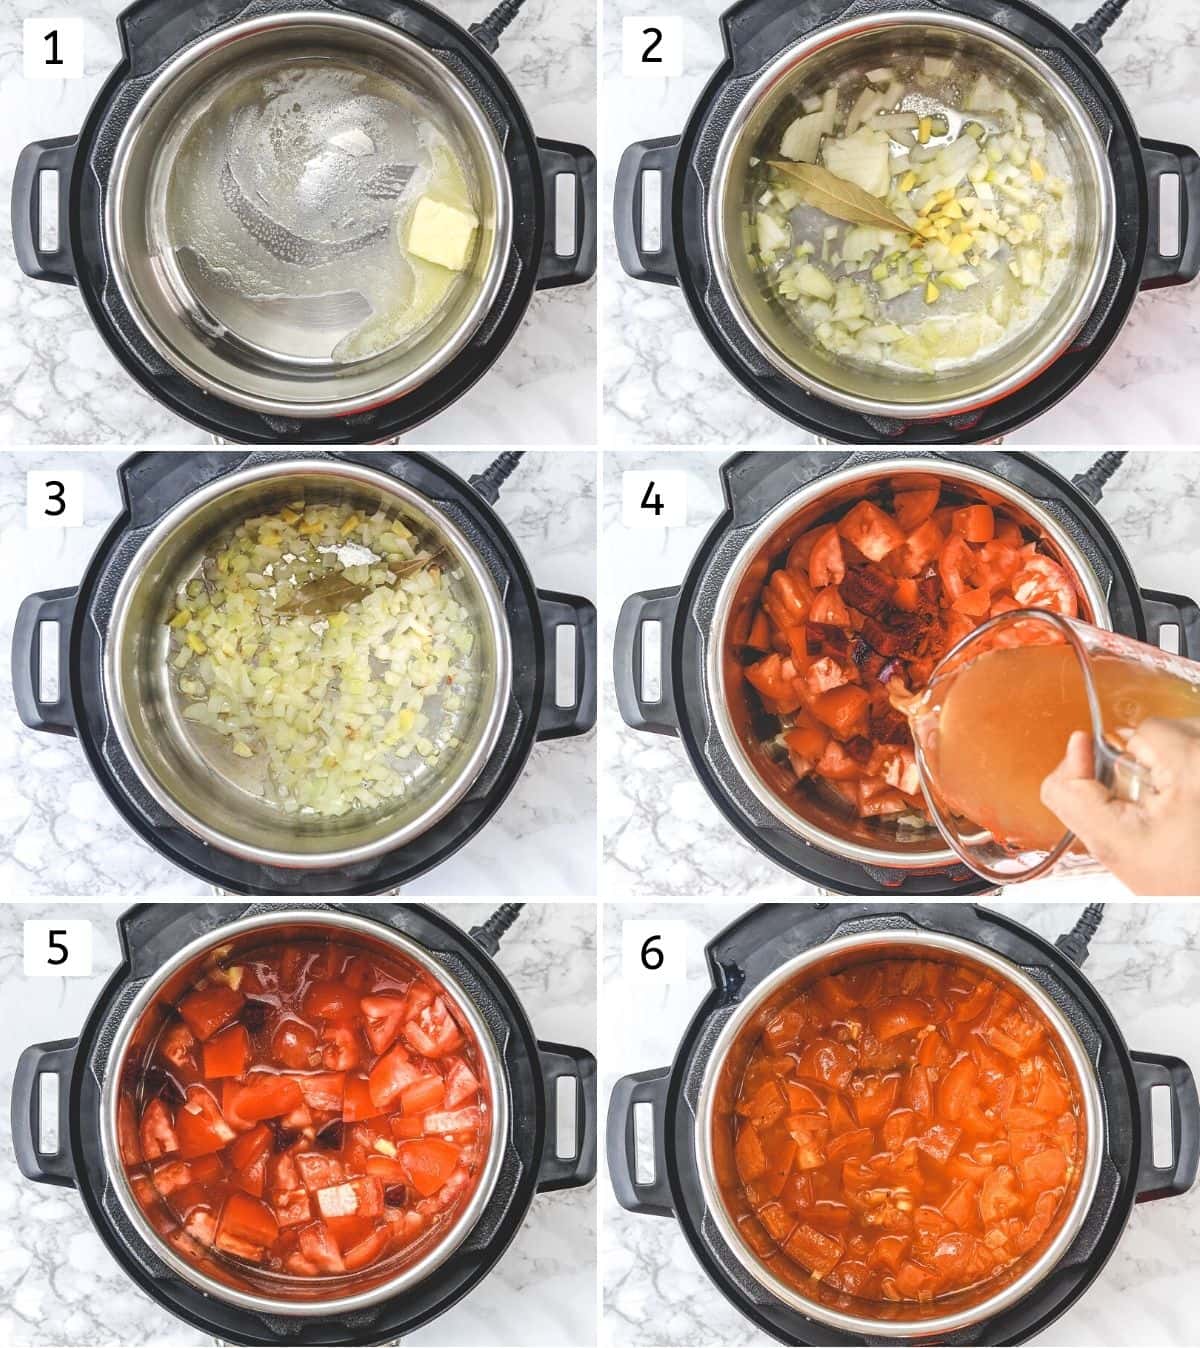 Collage of 6 steps showing cooking onion and adding rest soup ingredients and cooked mixture.